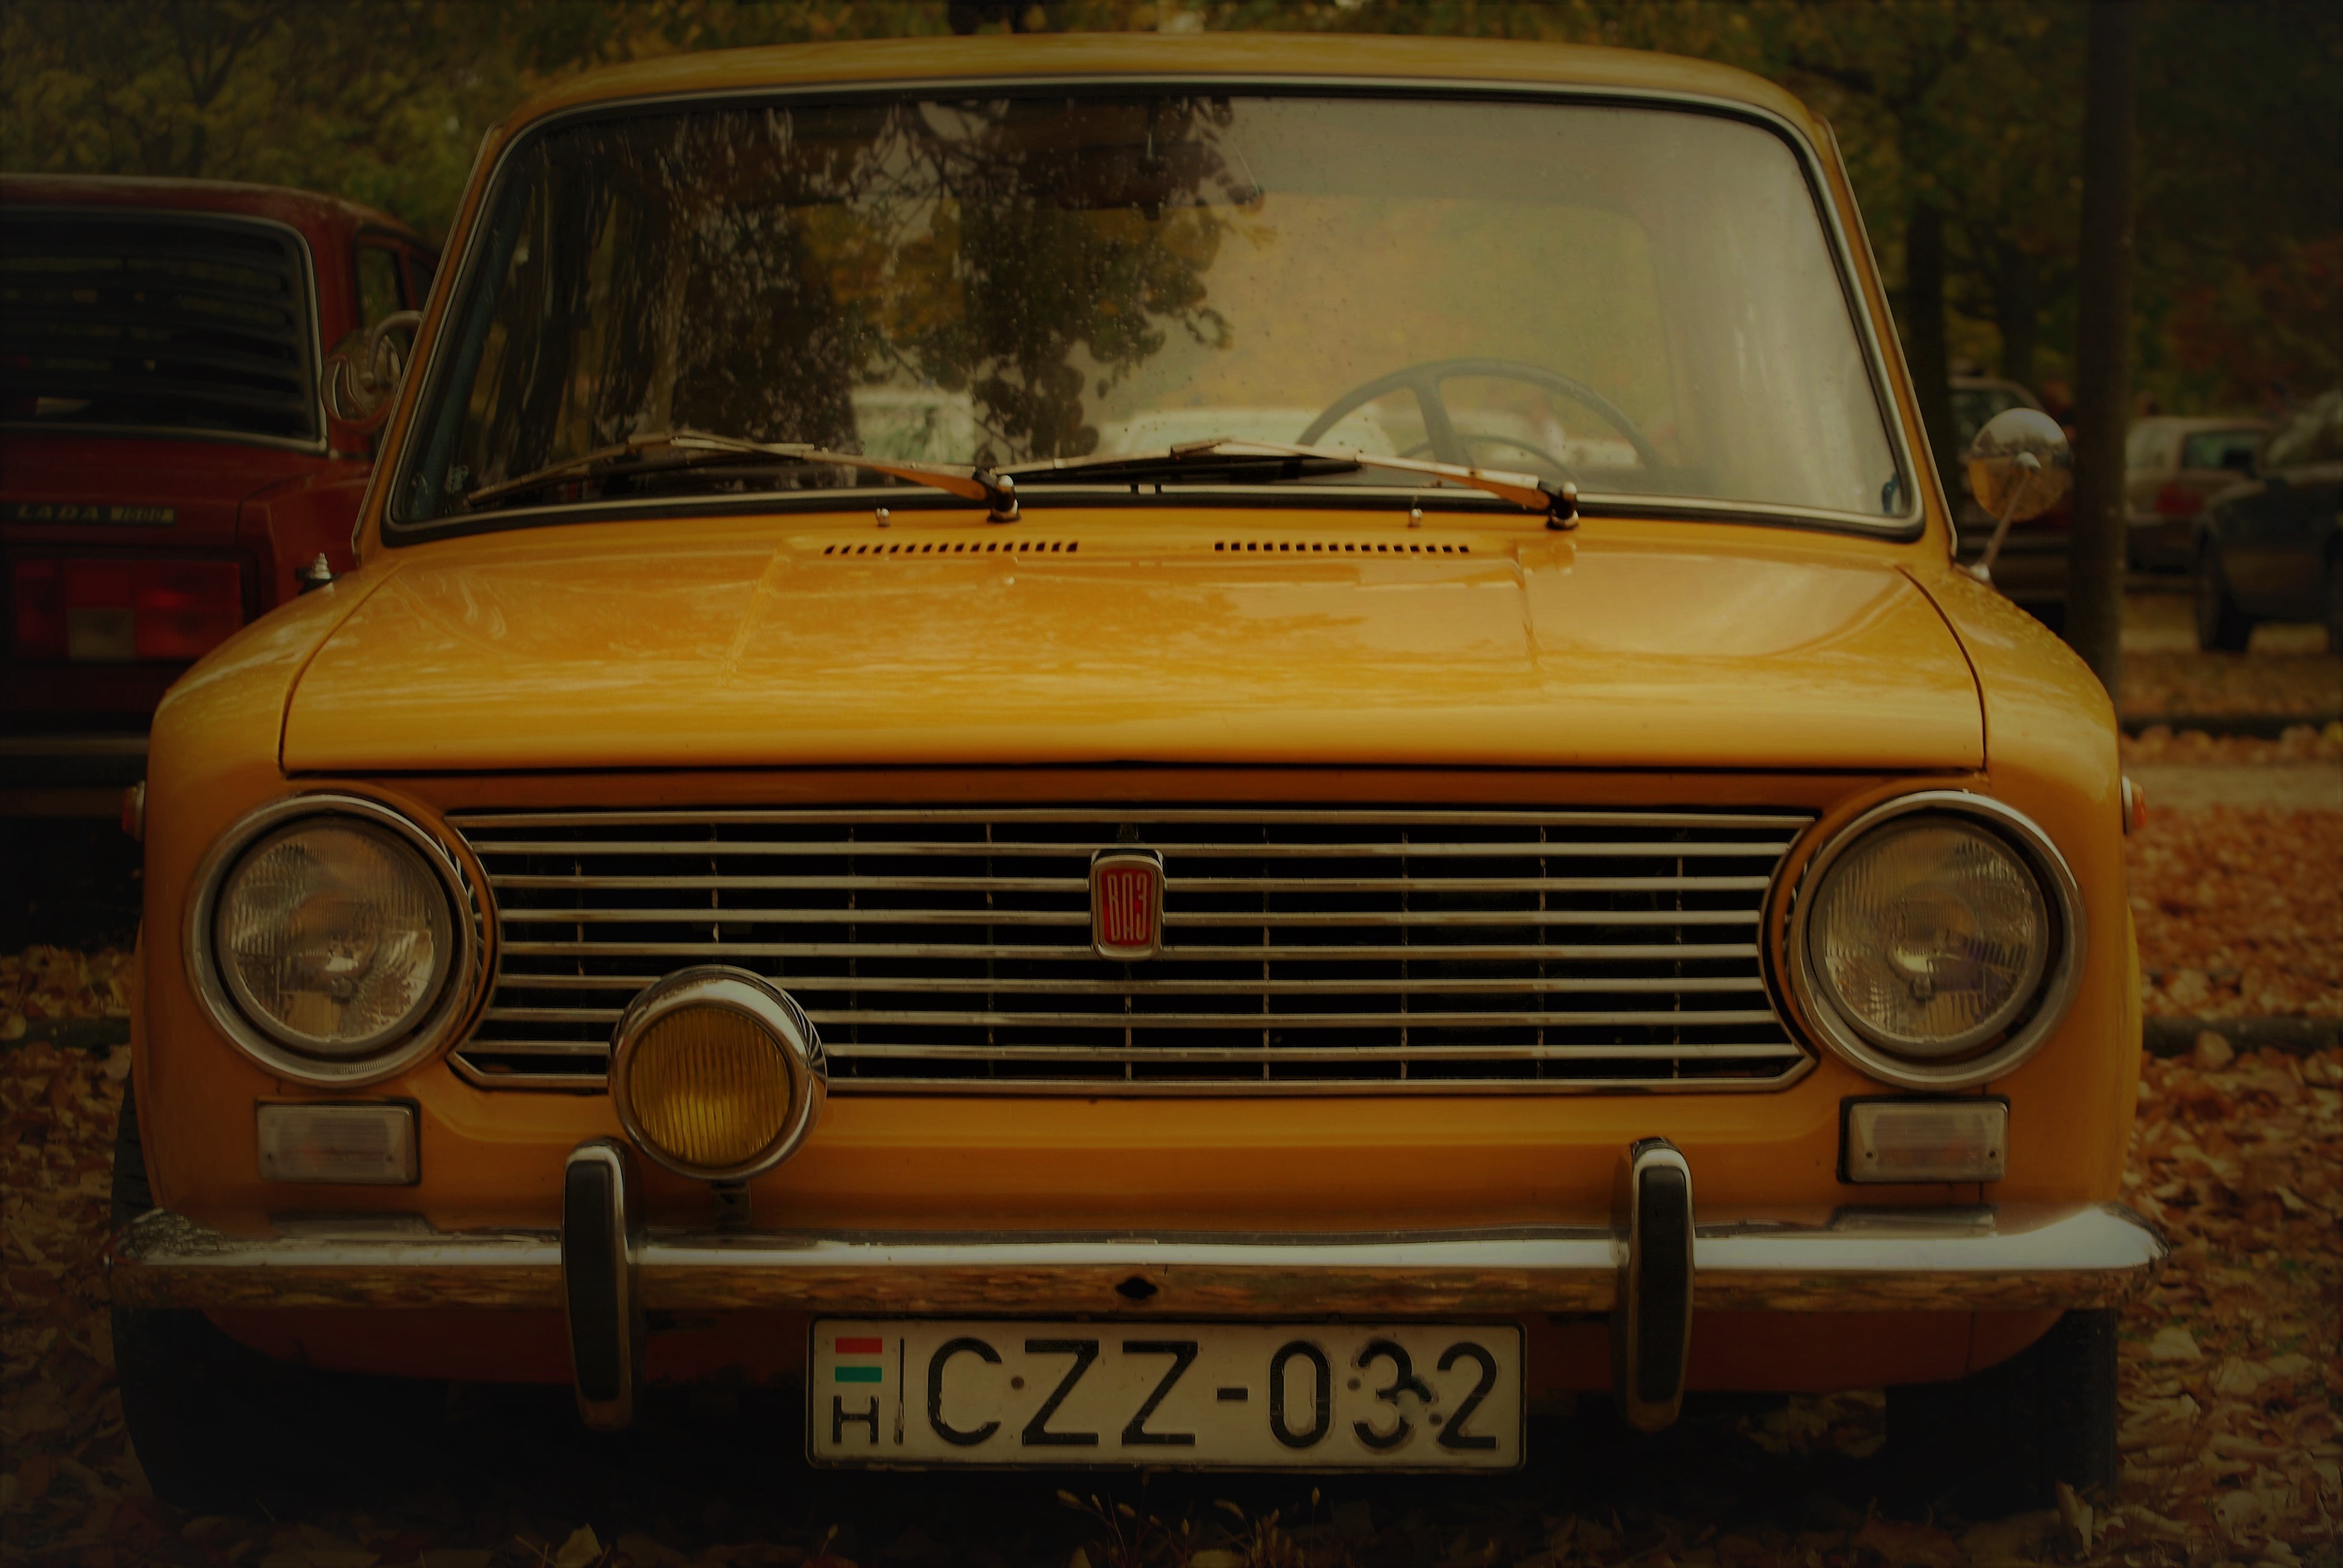 General 3872x2592 car LADA old car old school wheels Hungary frontal view yellow cars Russian cars